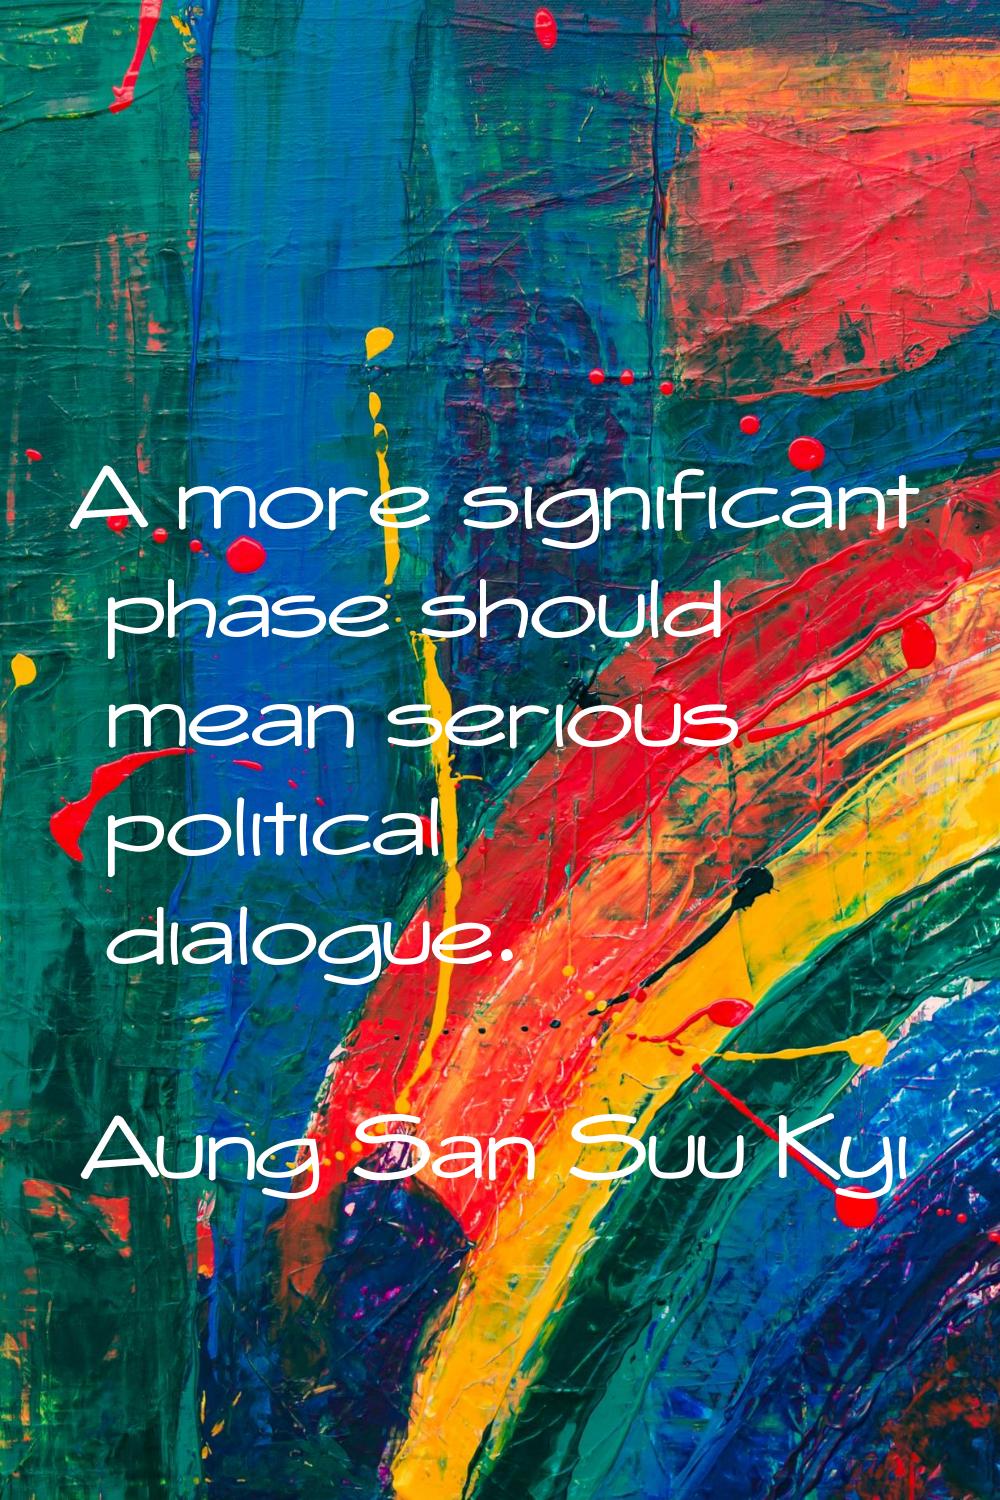 A more significant phase should mean serious political dialogue.